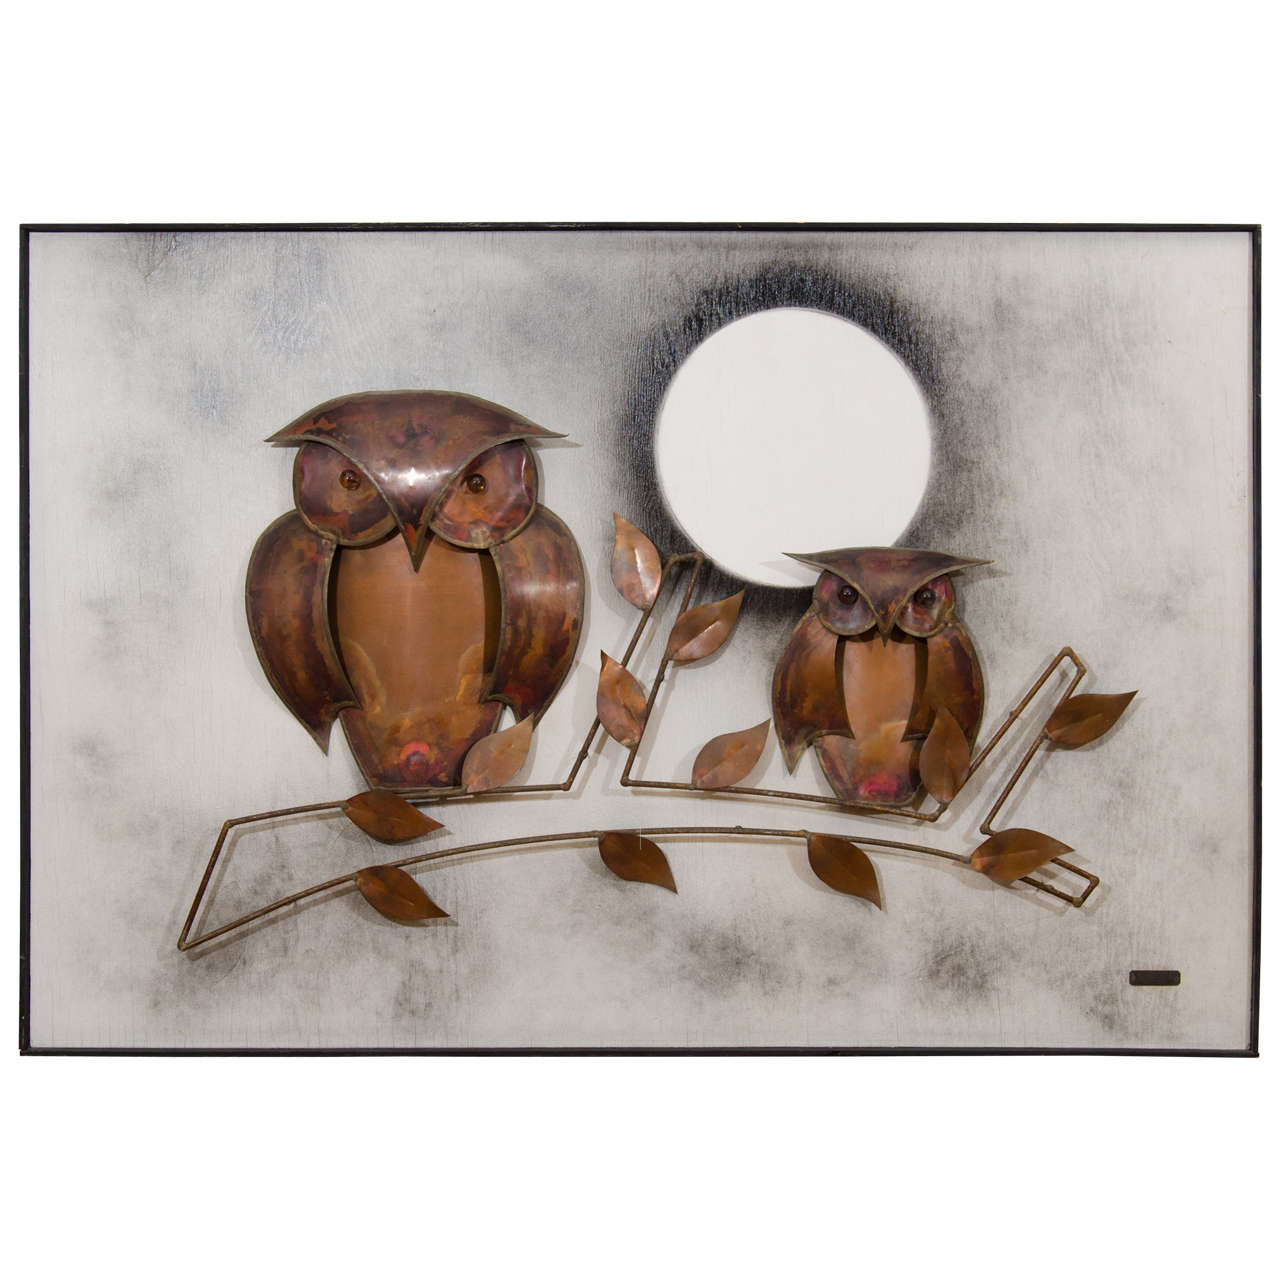 Spectacular Midcentury Signed, Oil on Board with Hand-Formed Copper Owls For Sale